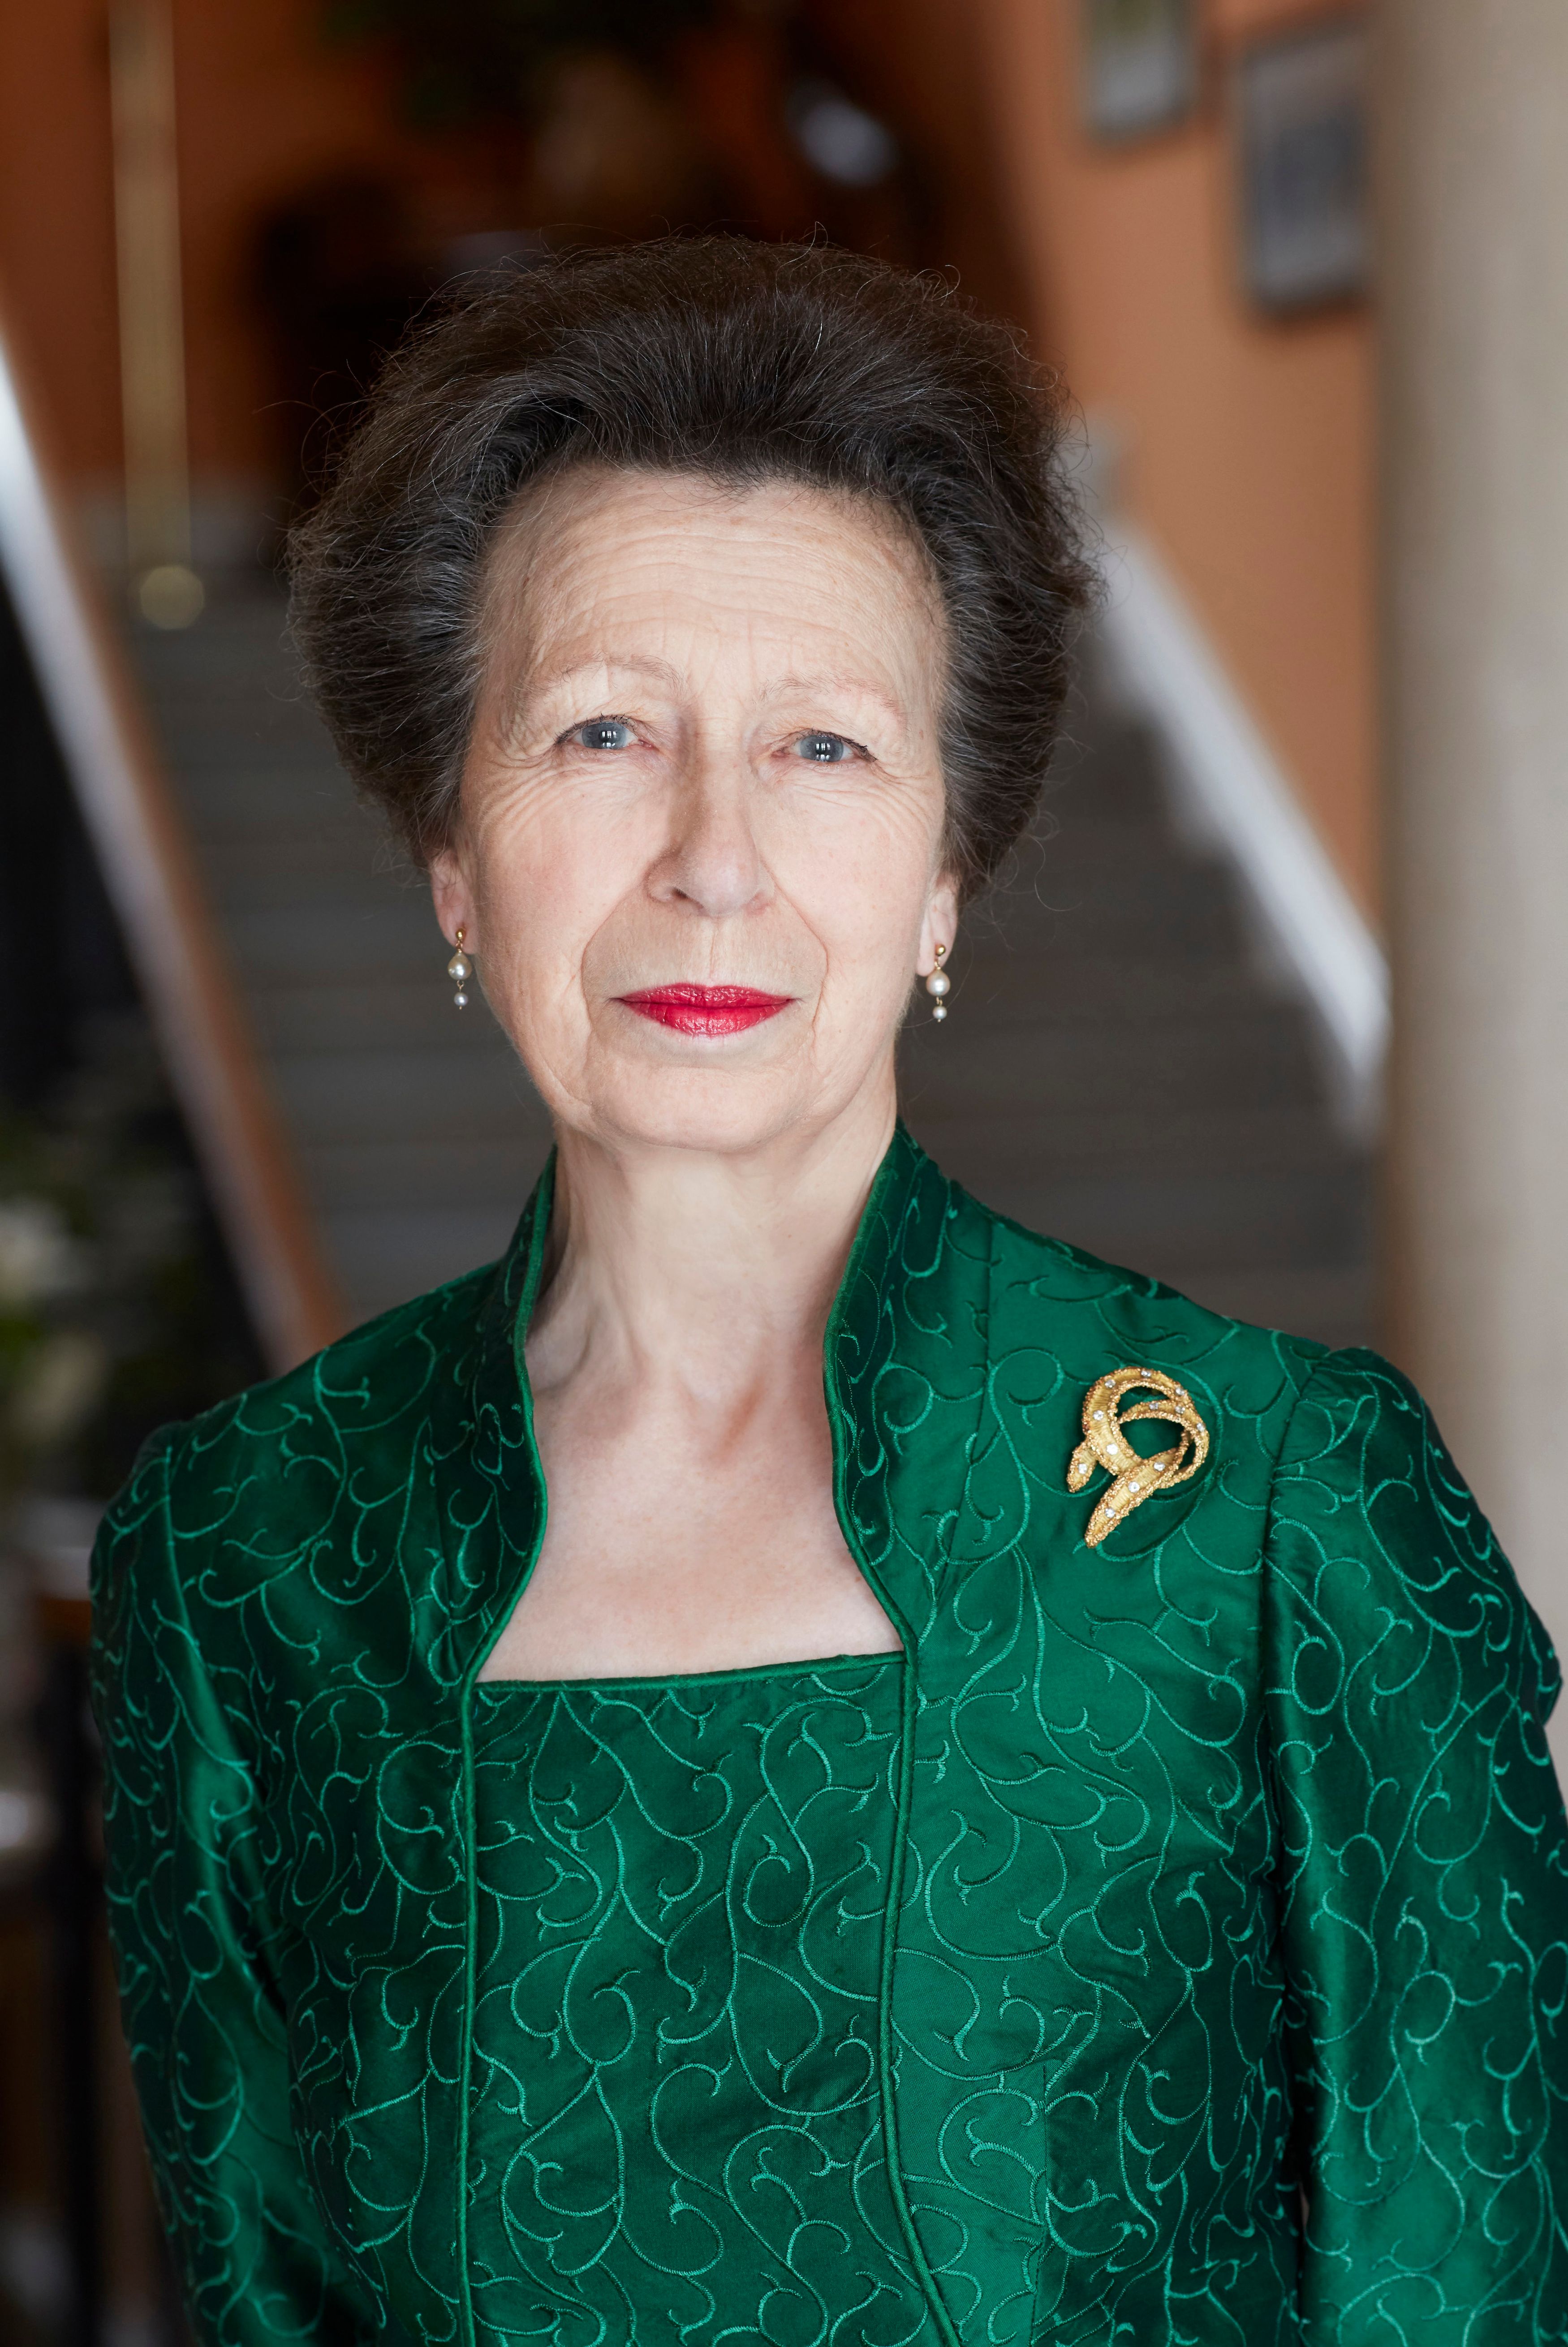 Princess Anne posing for a portrait at her home at Gatcombe Park in late February 2020. The photo was released to celebrate the Princess's 70th birthday | Source: Getty Images